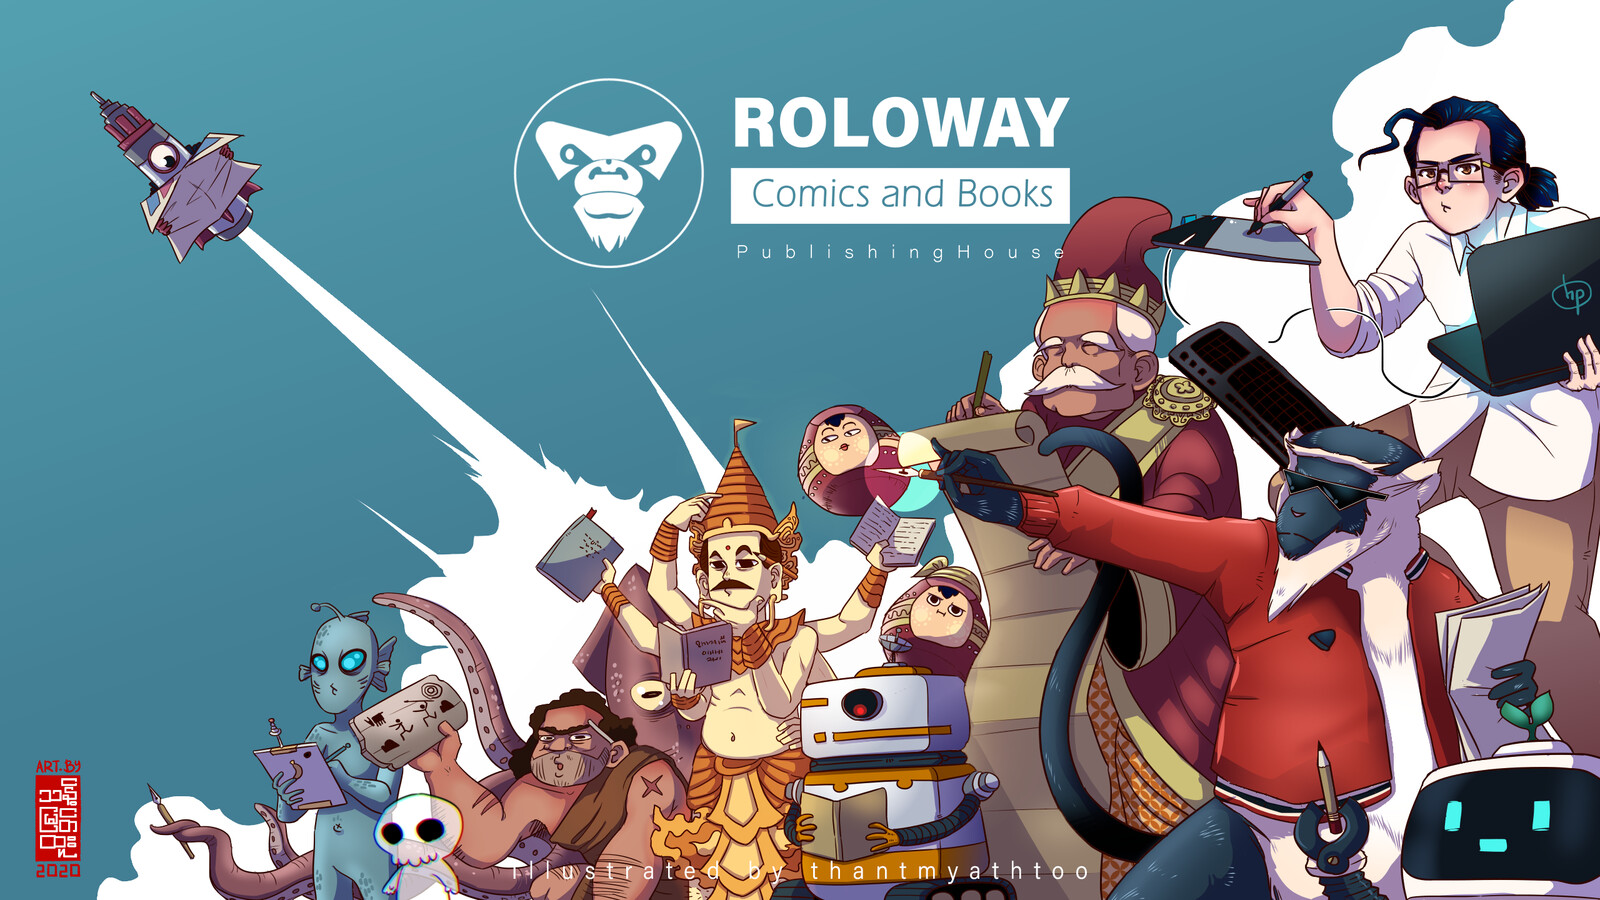 Roloway Comics and Books Facebook Page Cover Art. 